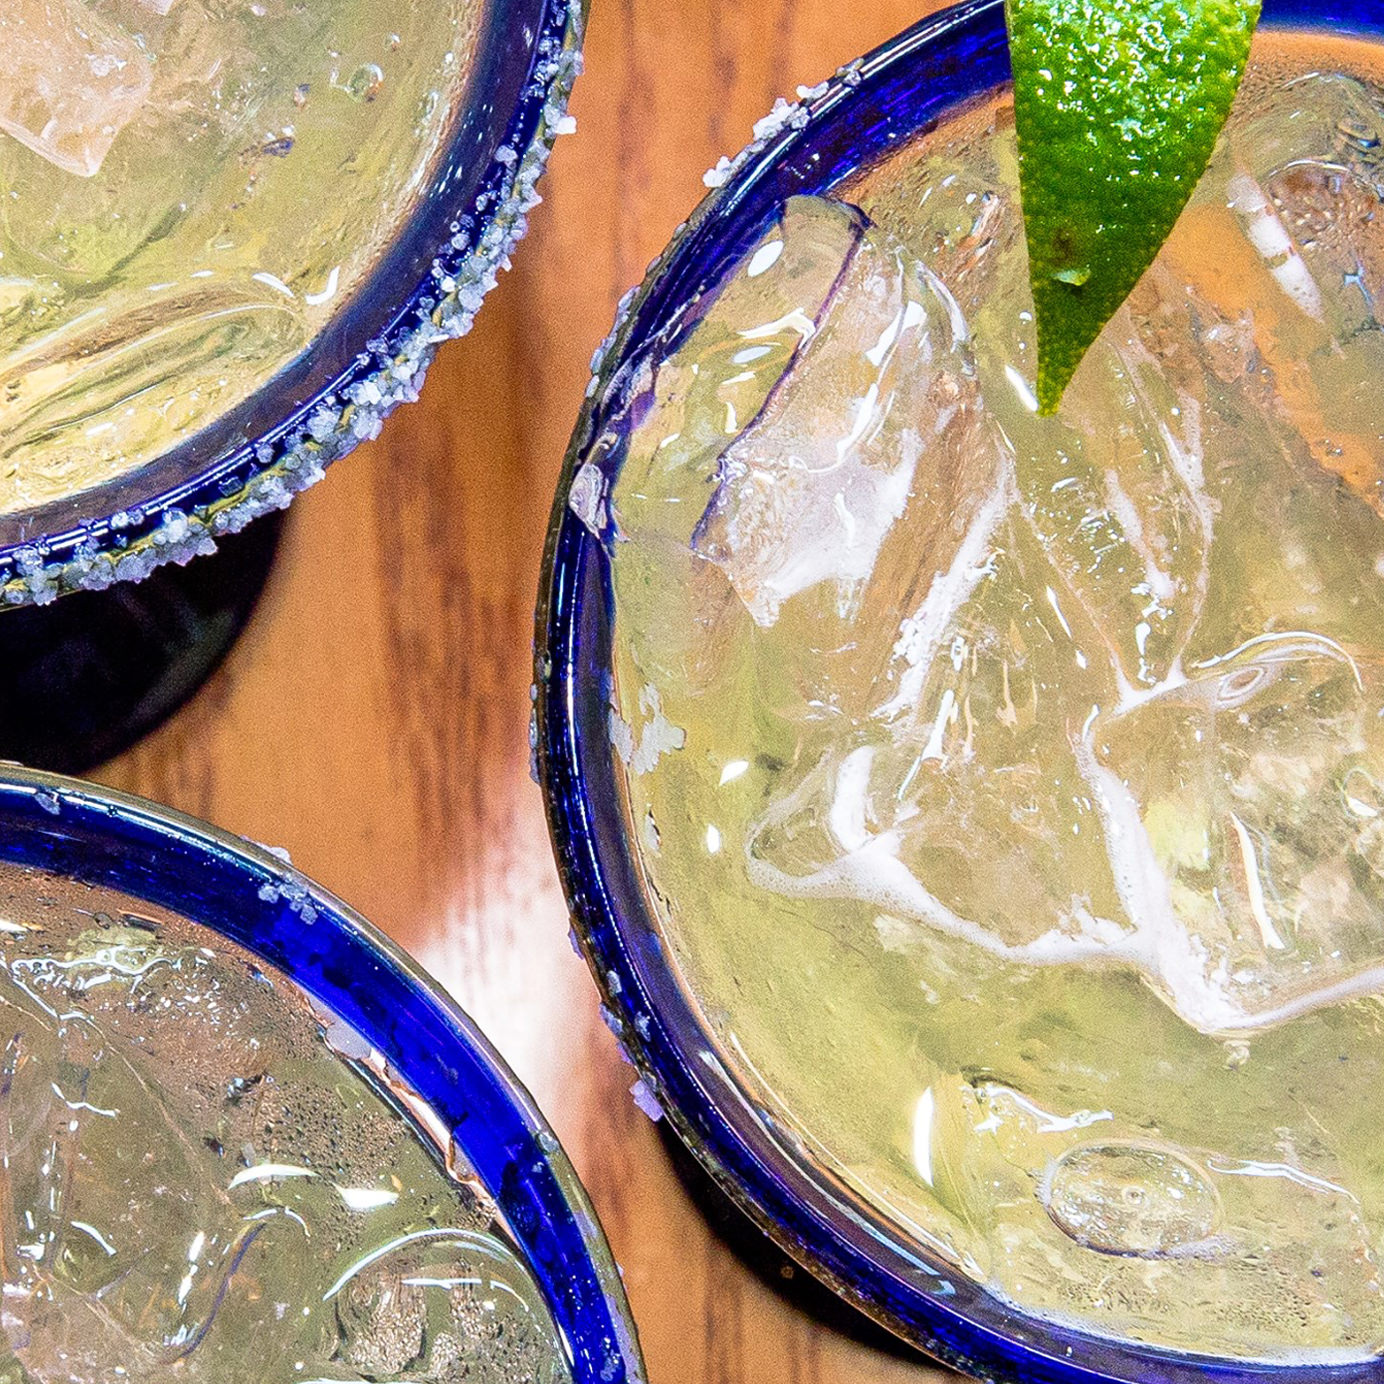 How Chili’s Margarita Became the Big Mac of Cocktails